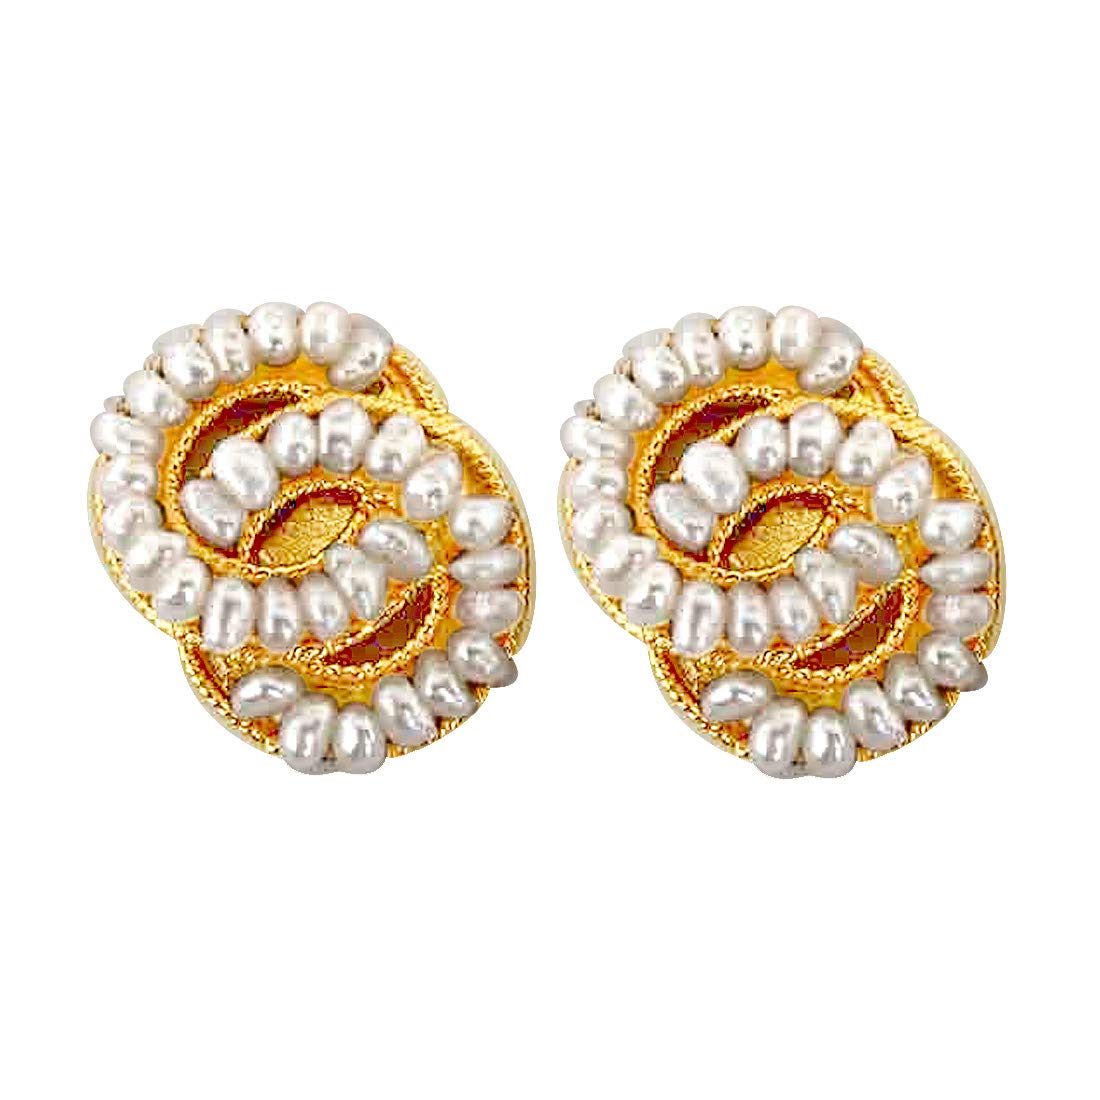 Lovers Knot - Freshwater Pearl & Gold Plated Stud Earrings for Women (SE41)